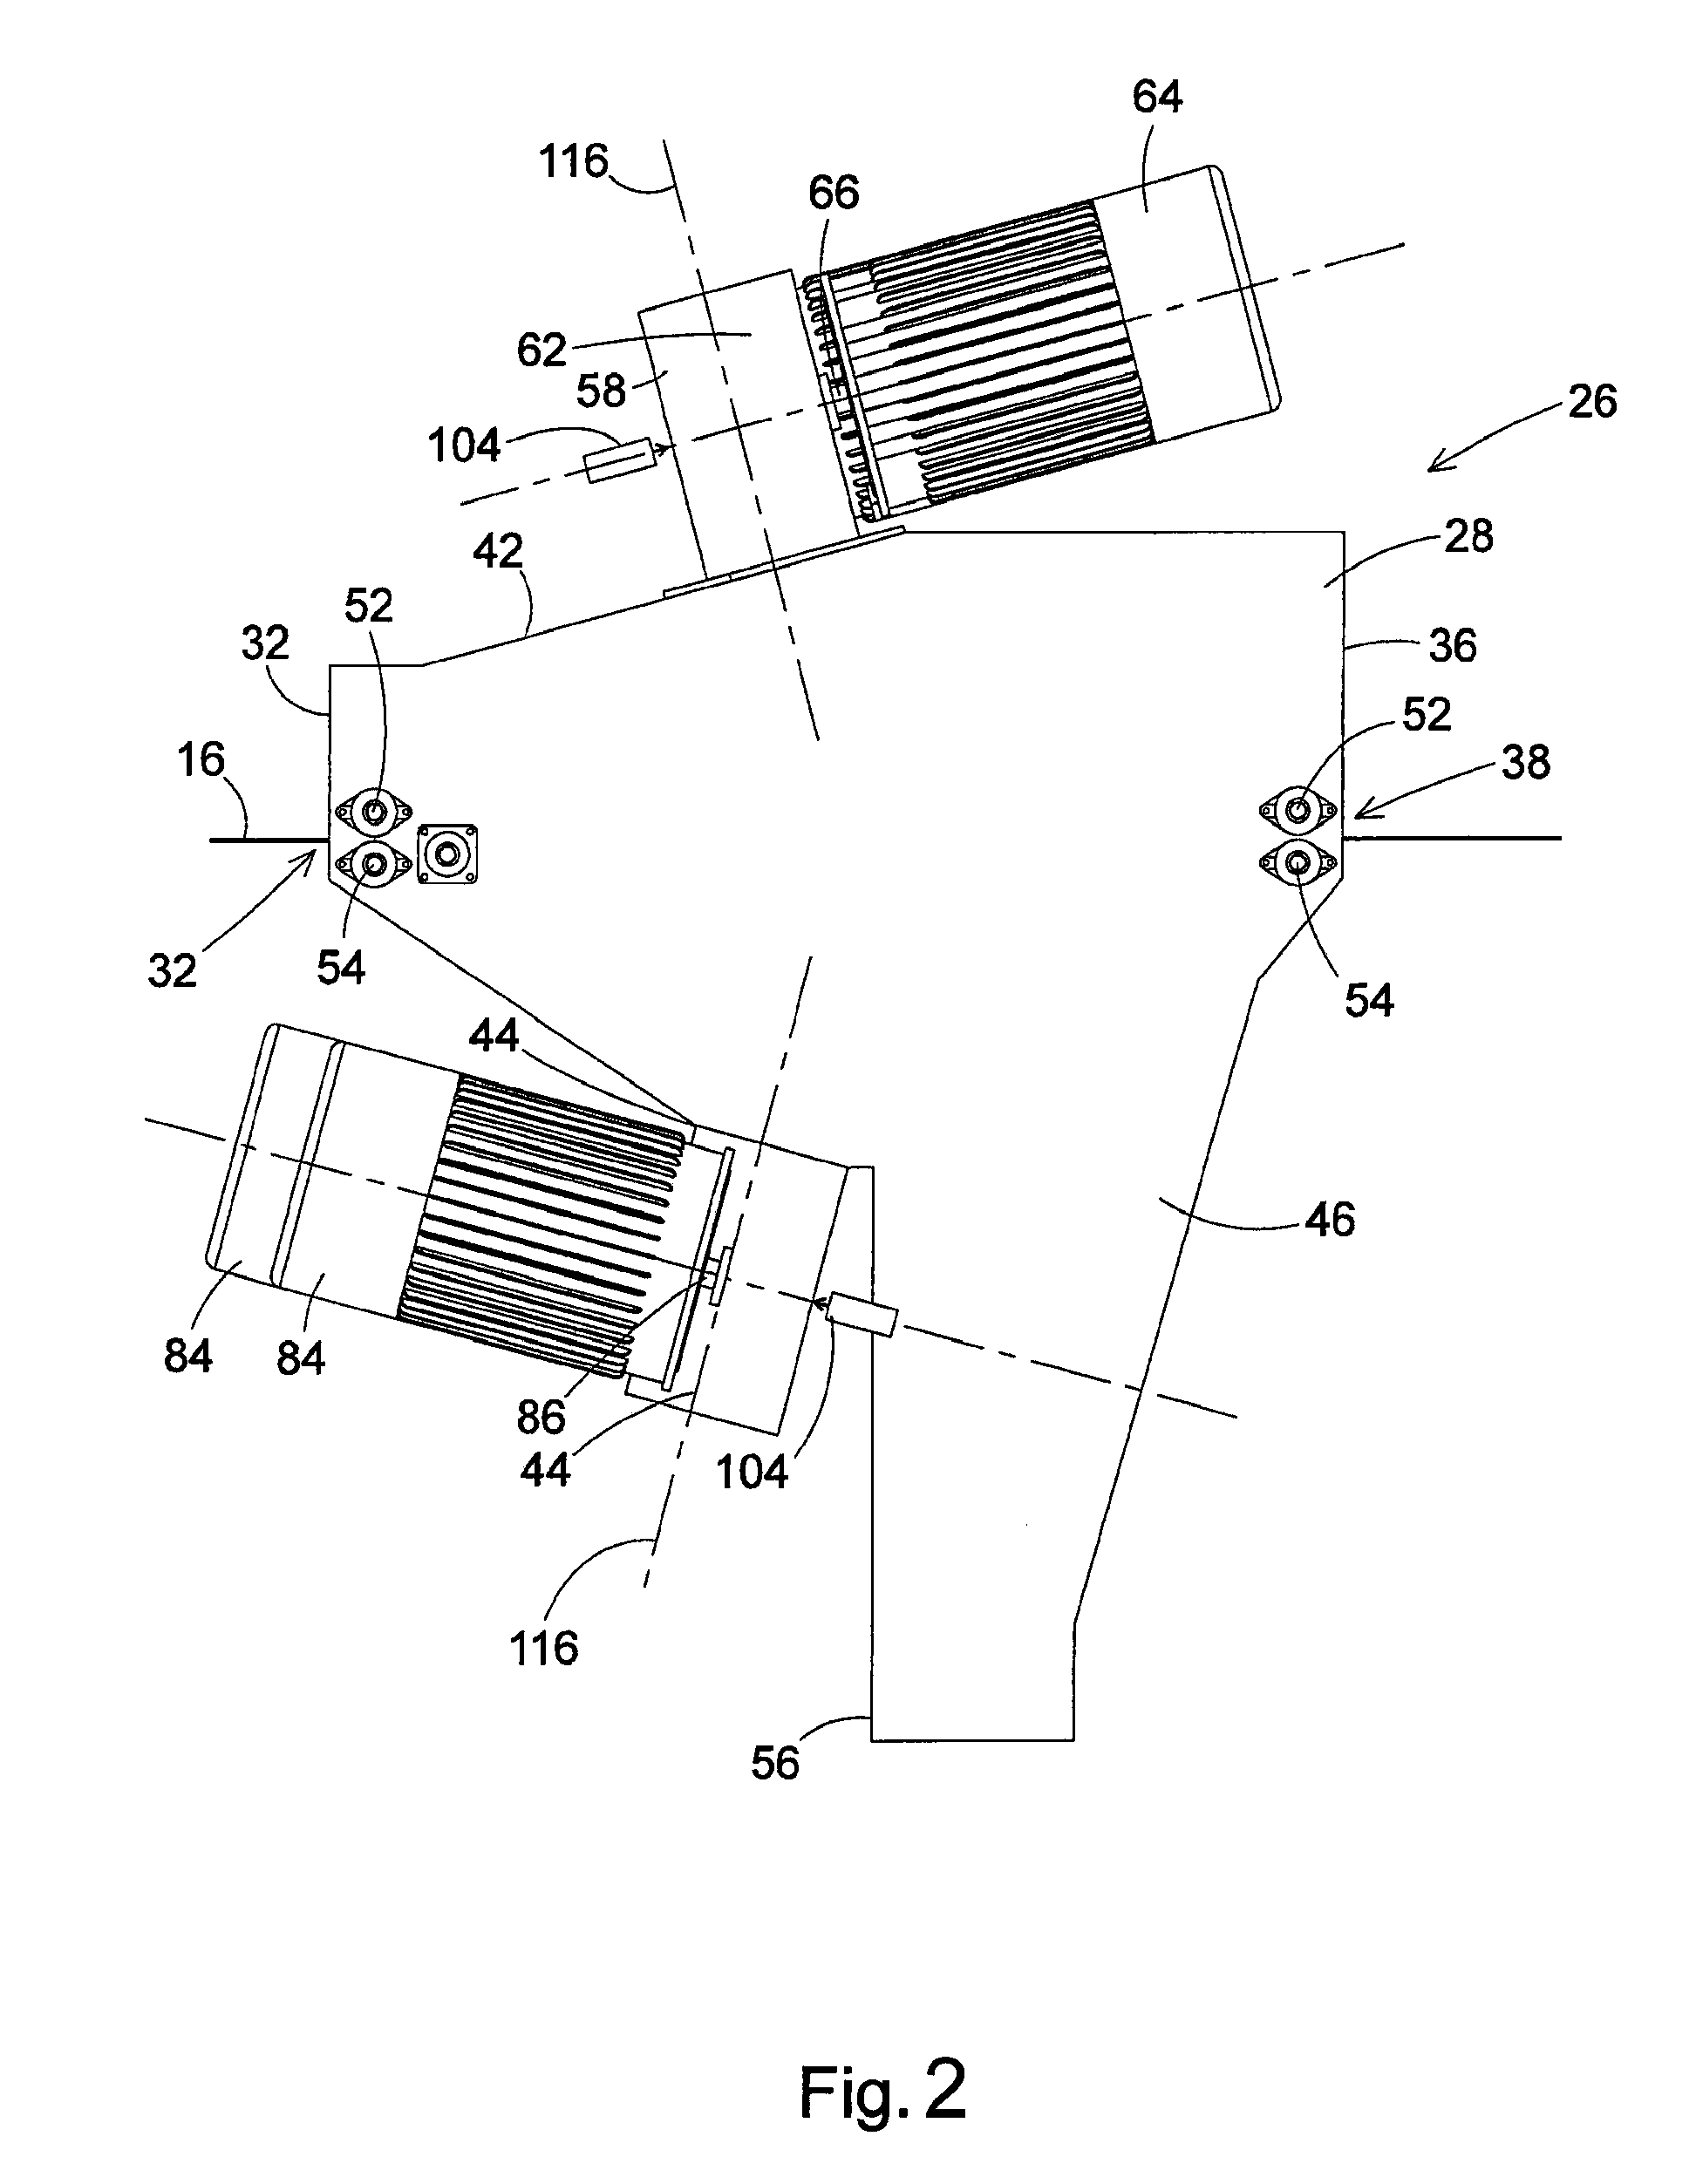 Method of producing rust inhibitive sheet metal through scale removal with a slurry blasting descaling cell having improved grit flow